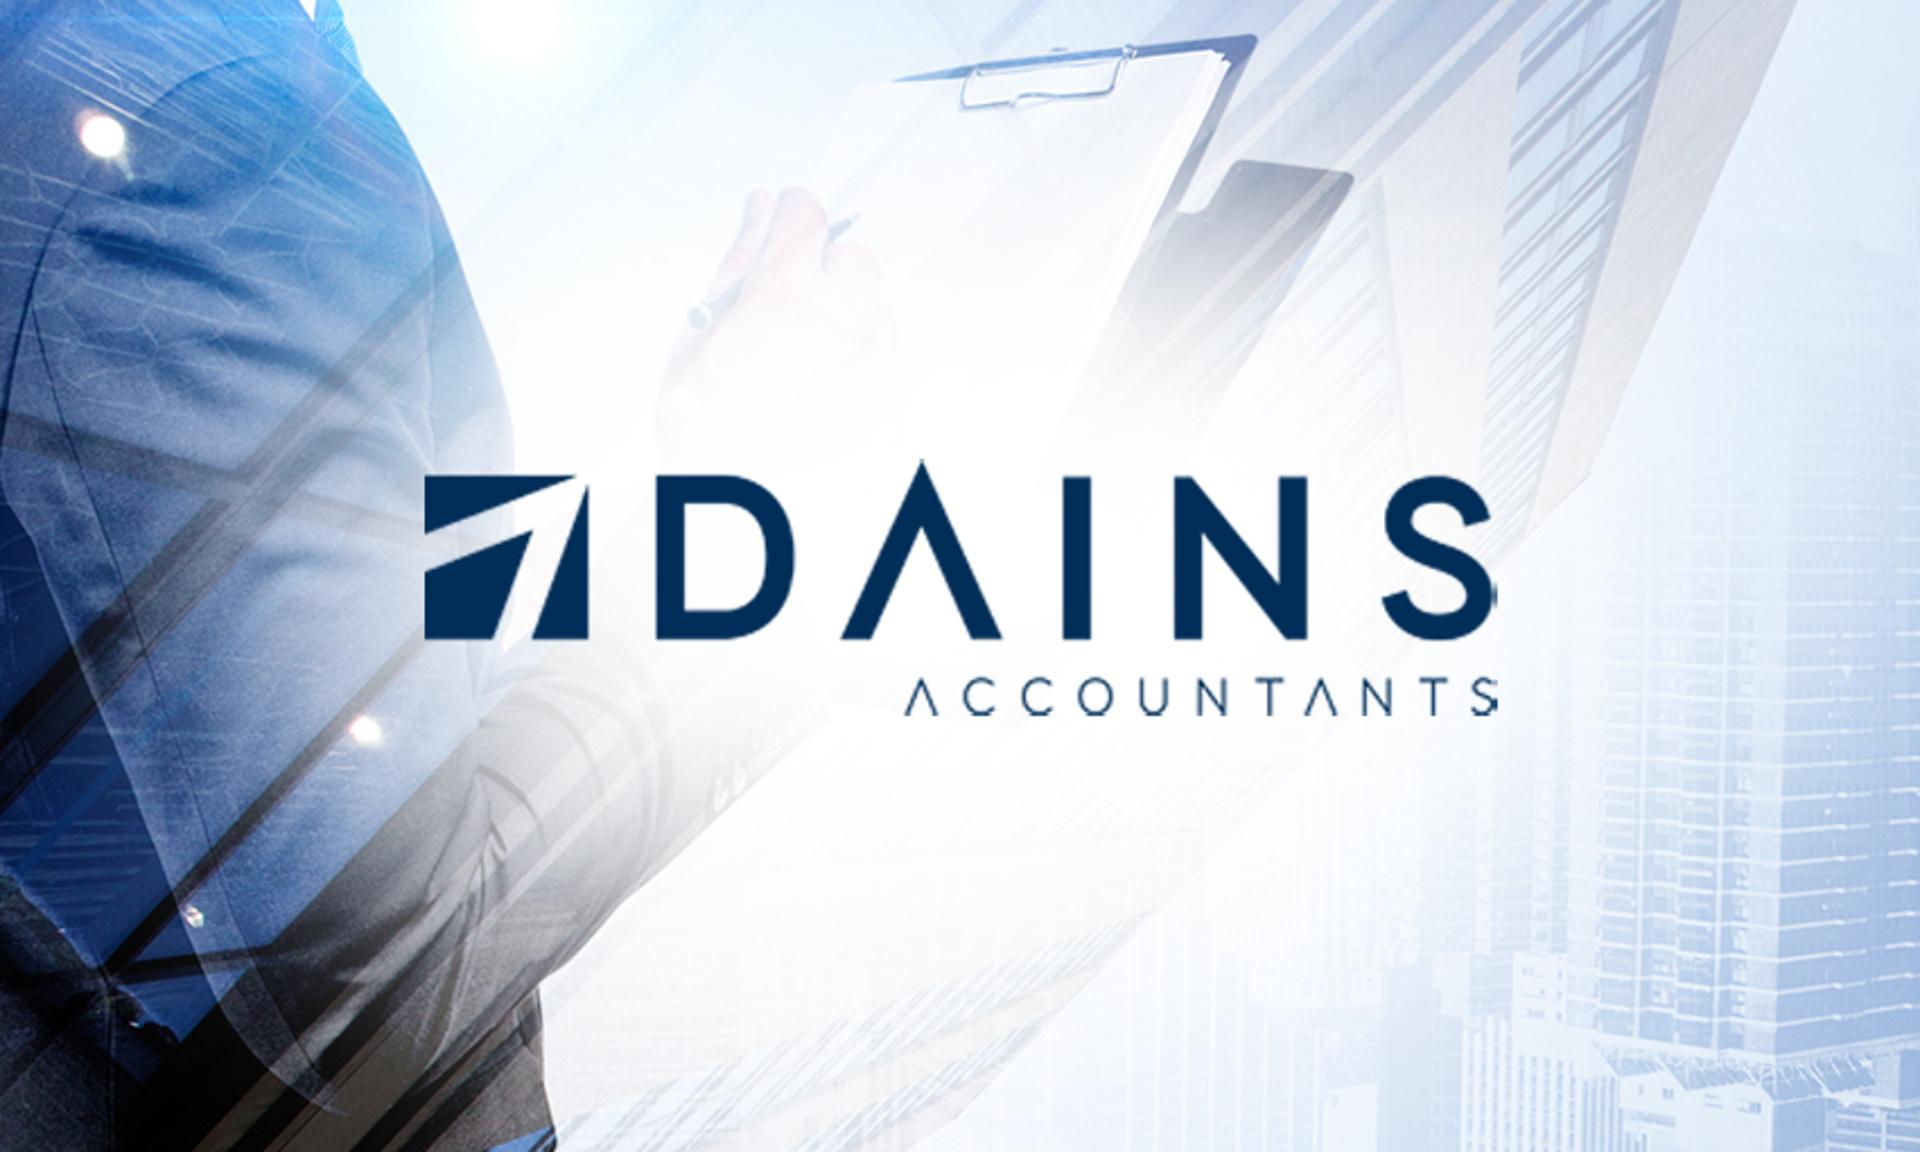 Accountancy firm broadens service offering with double acquisition